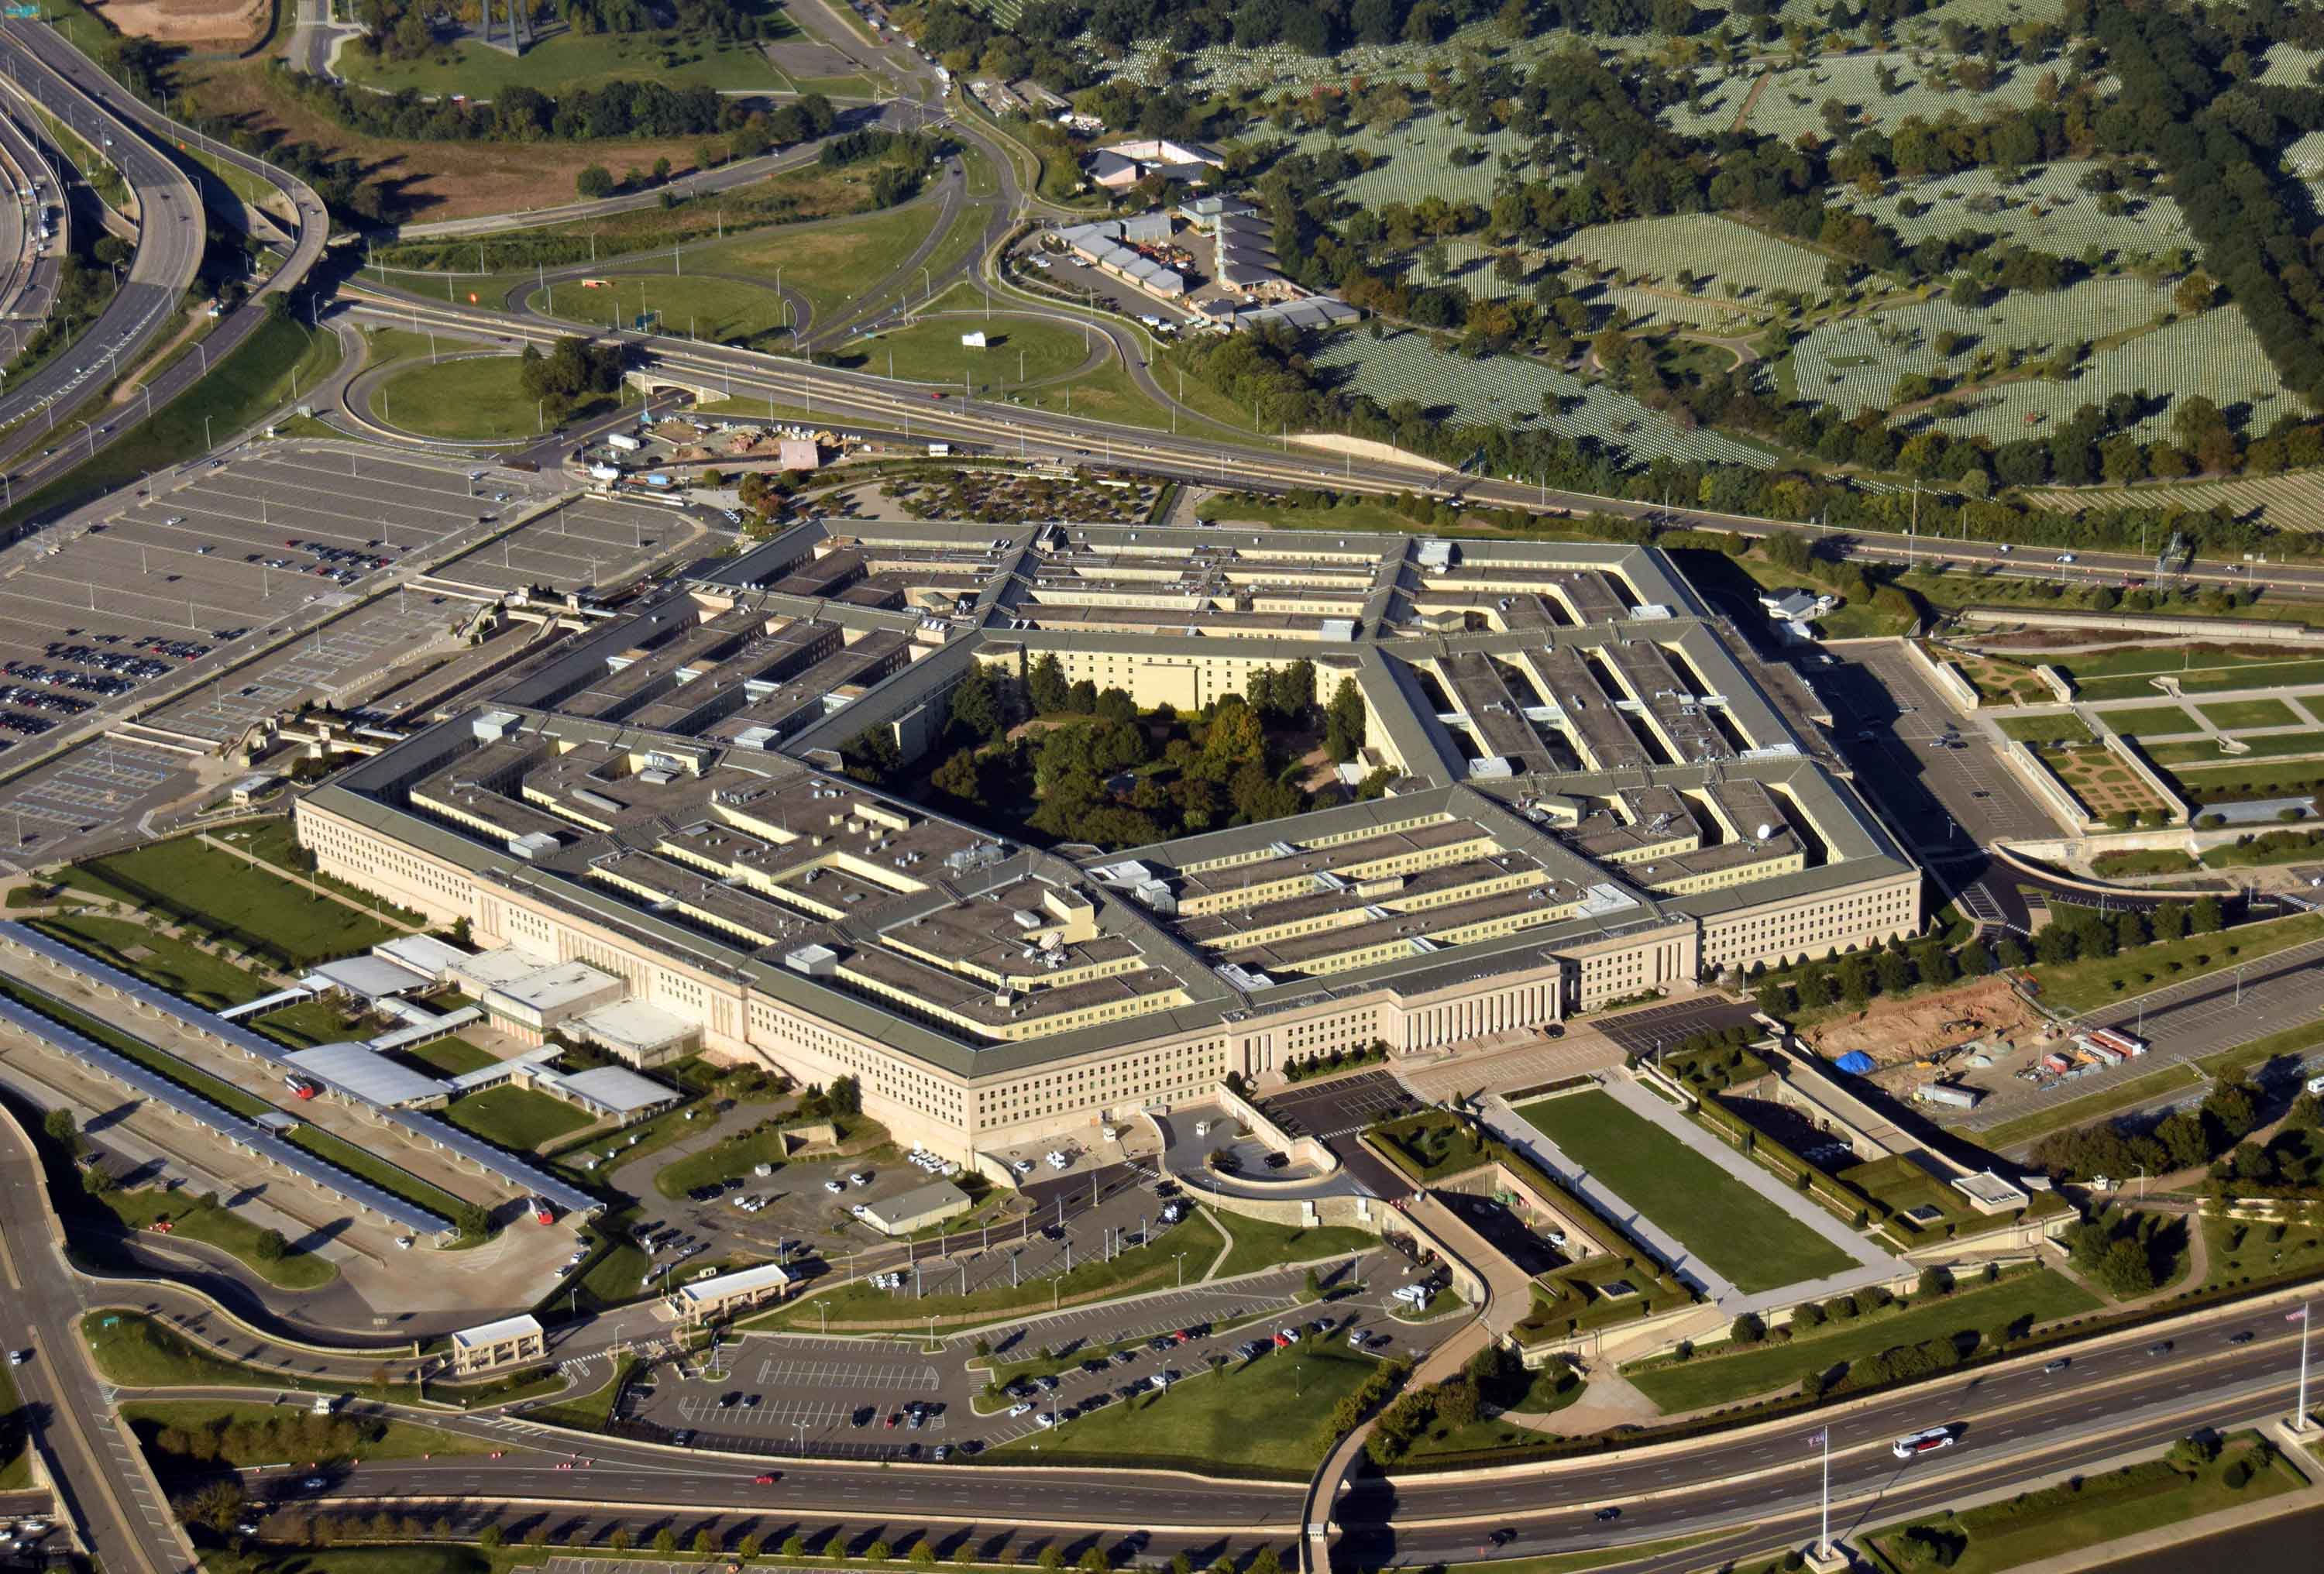 Image of the Pentagon - Department Of Defense Image